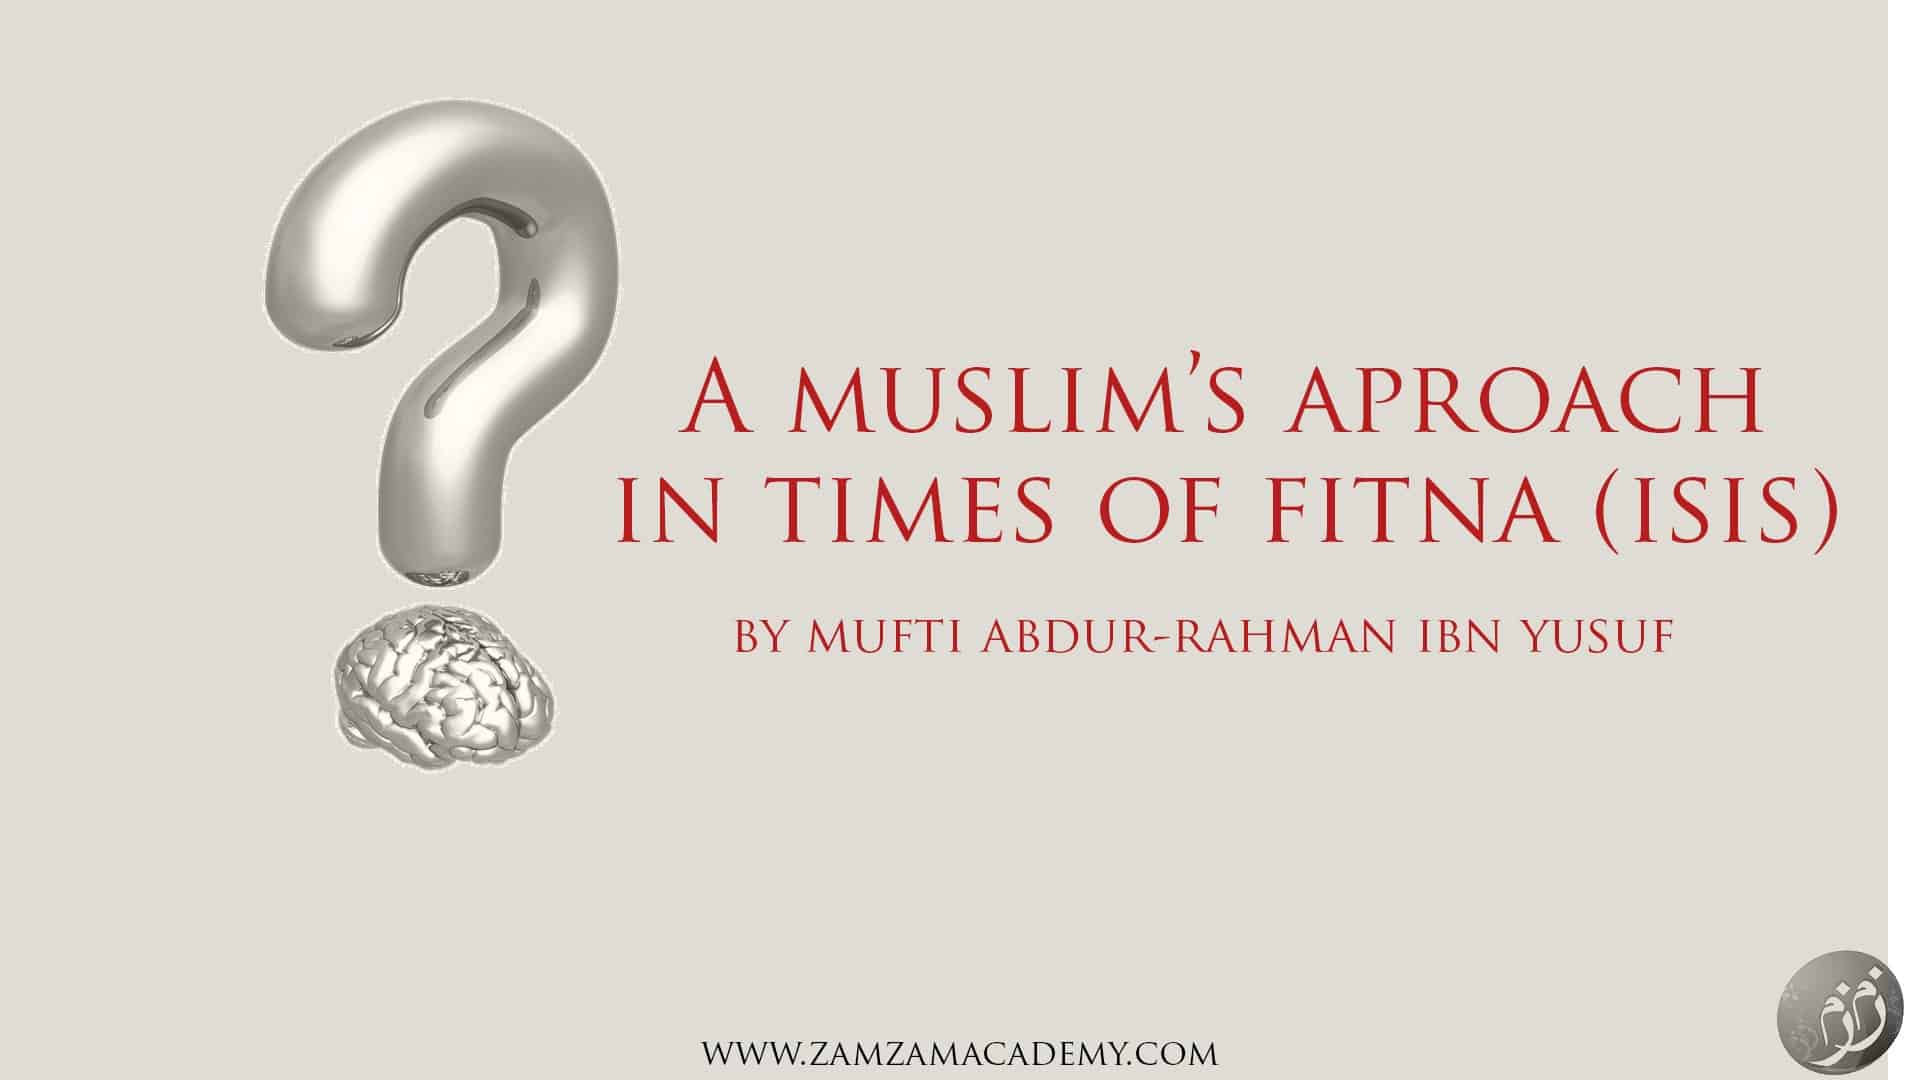 Abdur-Rahman ibn Yusuf – A Muslim’s Approach in Times of Fitna (ISIS)